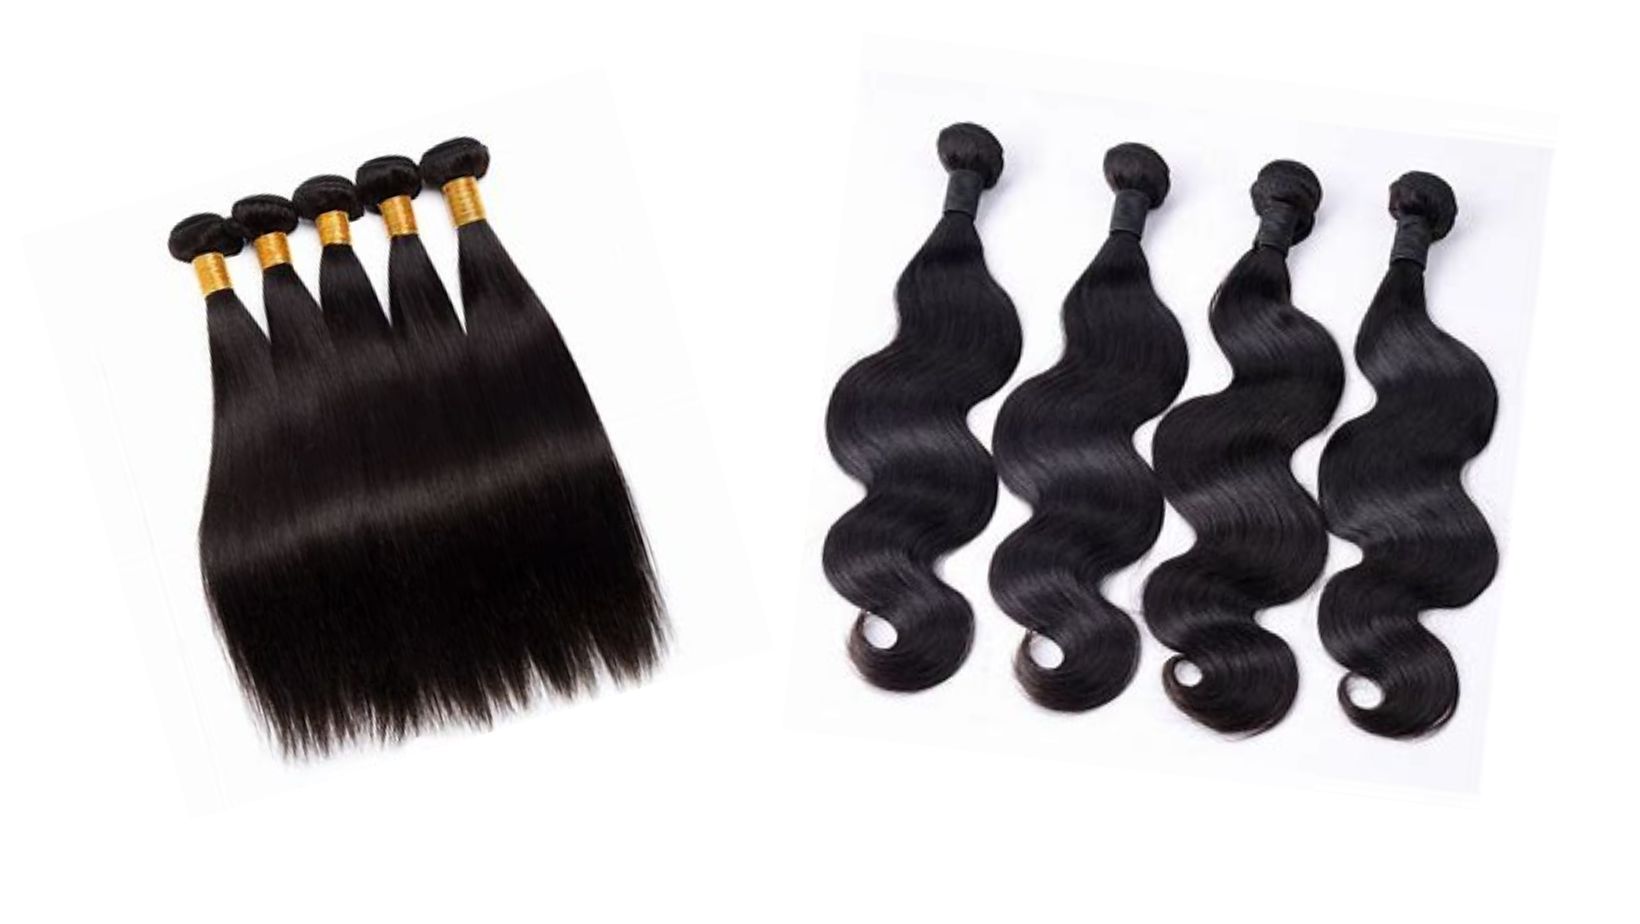 Things to Look for When Buying Human Hair Bundles